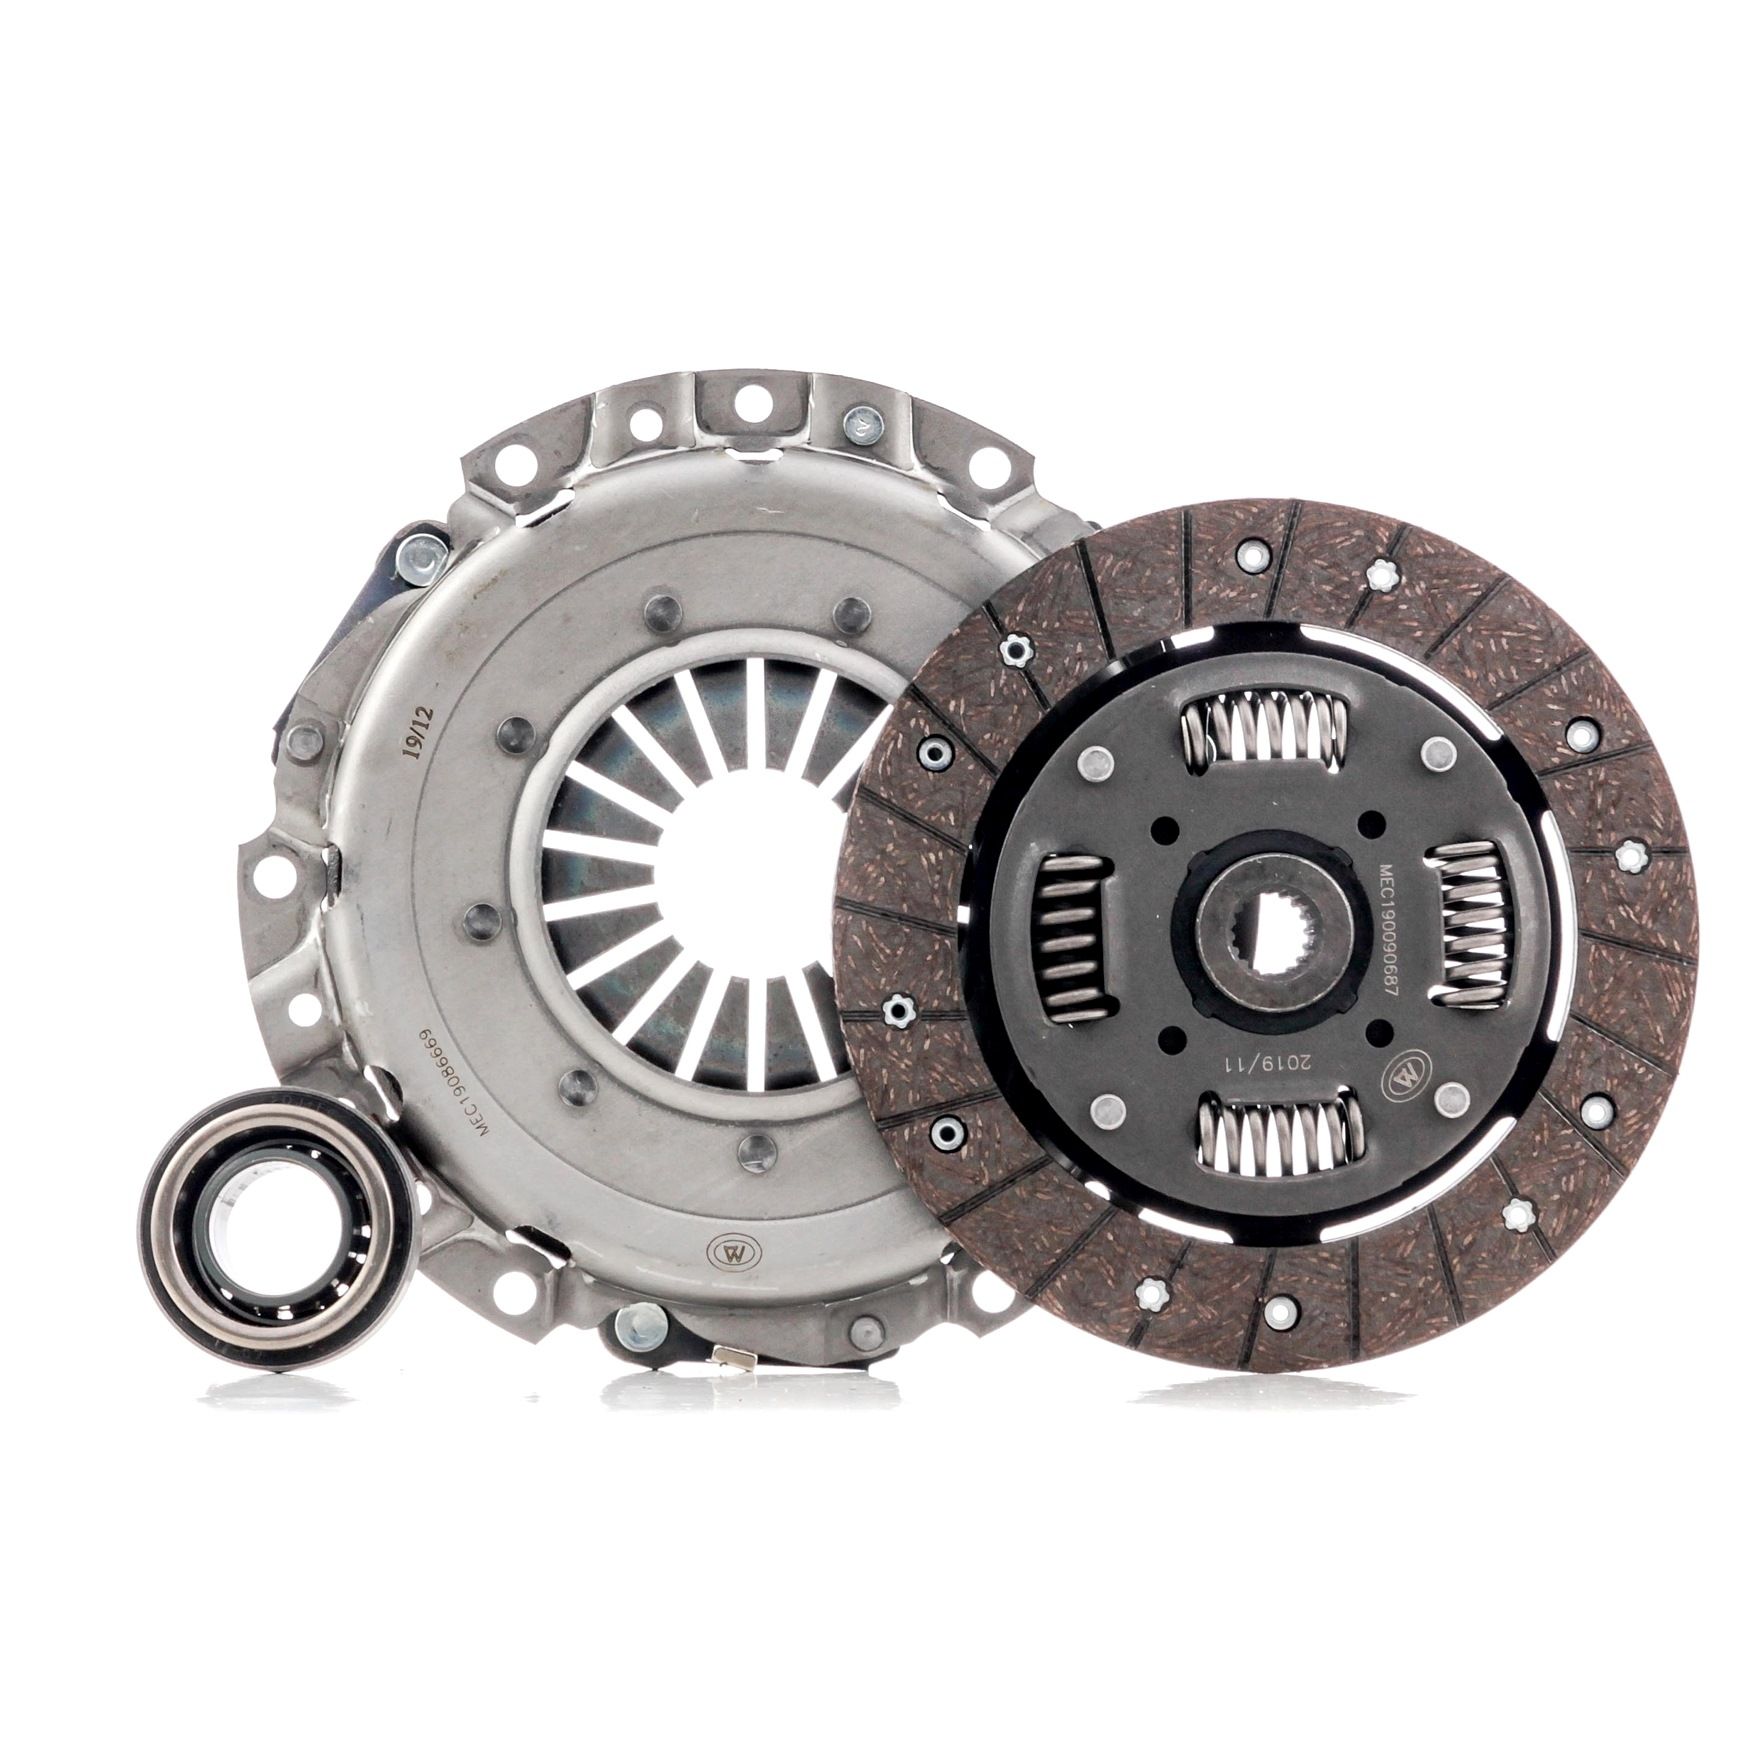 Clutch set MECARM with clutch release bearing, 190mm - MK10152